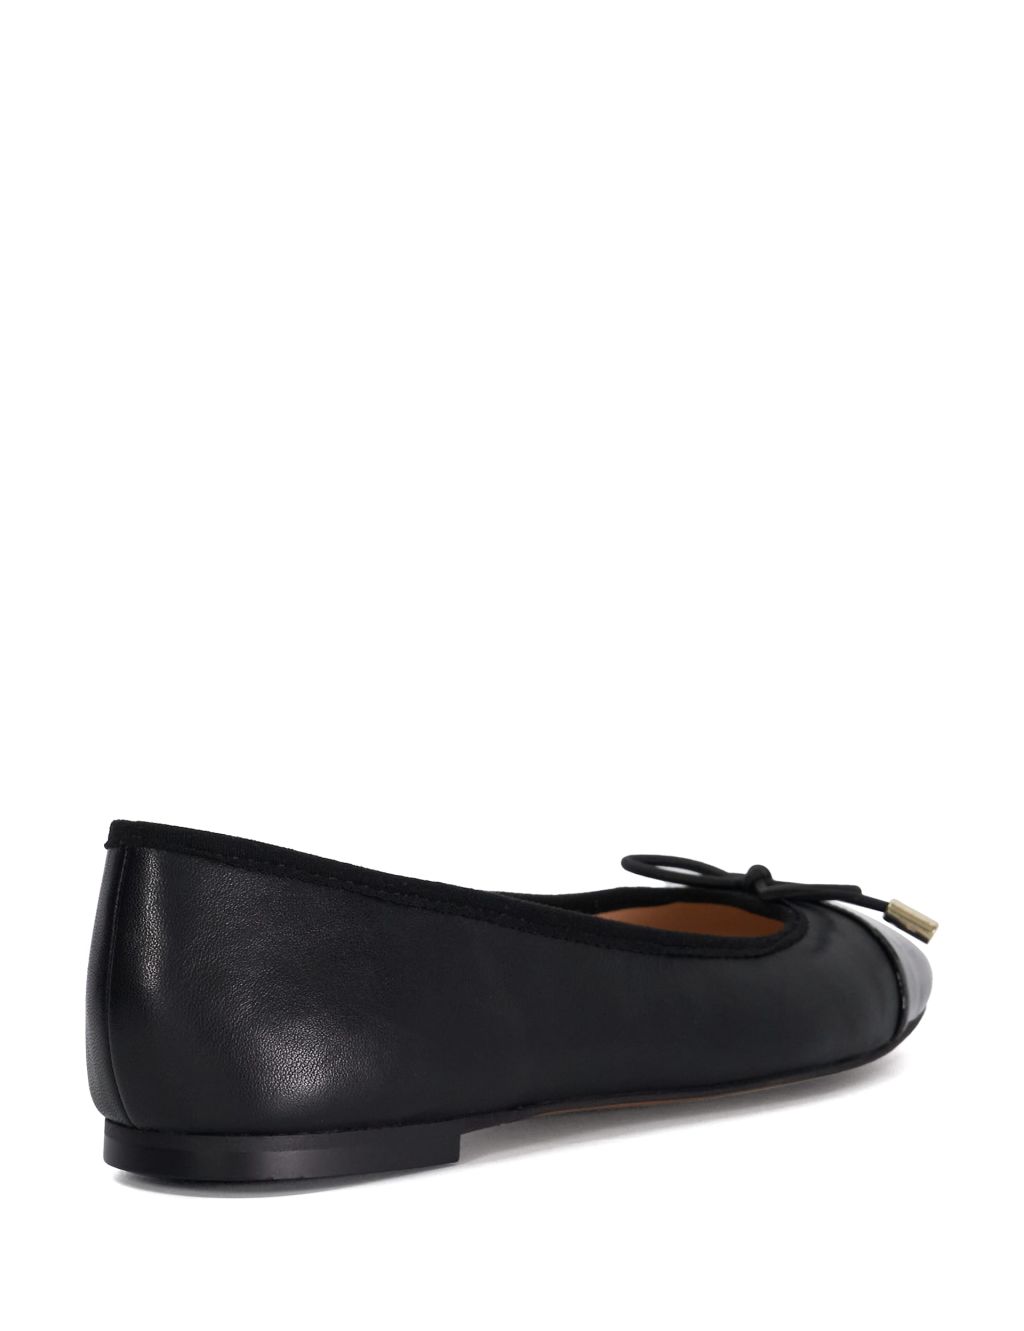 Leather Flat Ballet Pumps 2 of 5